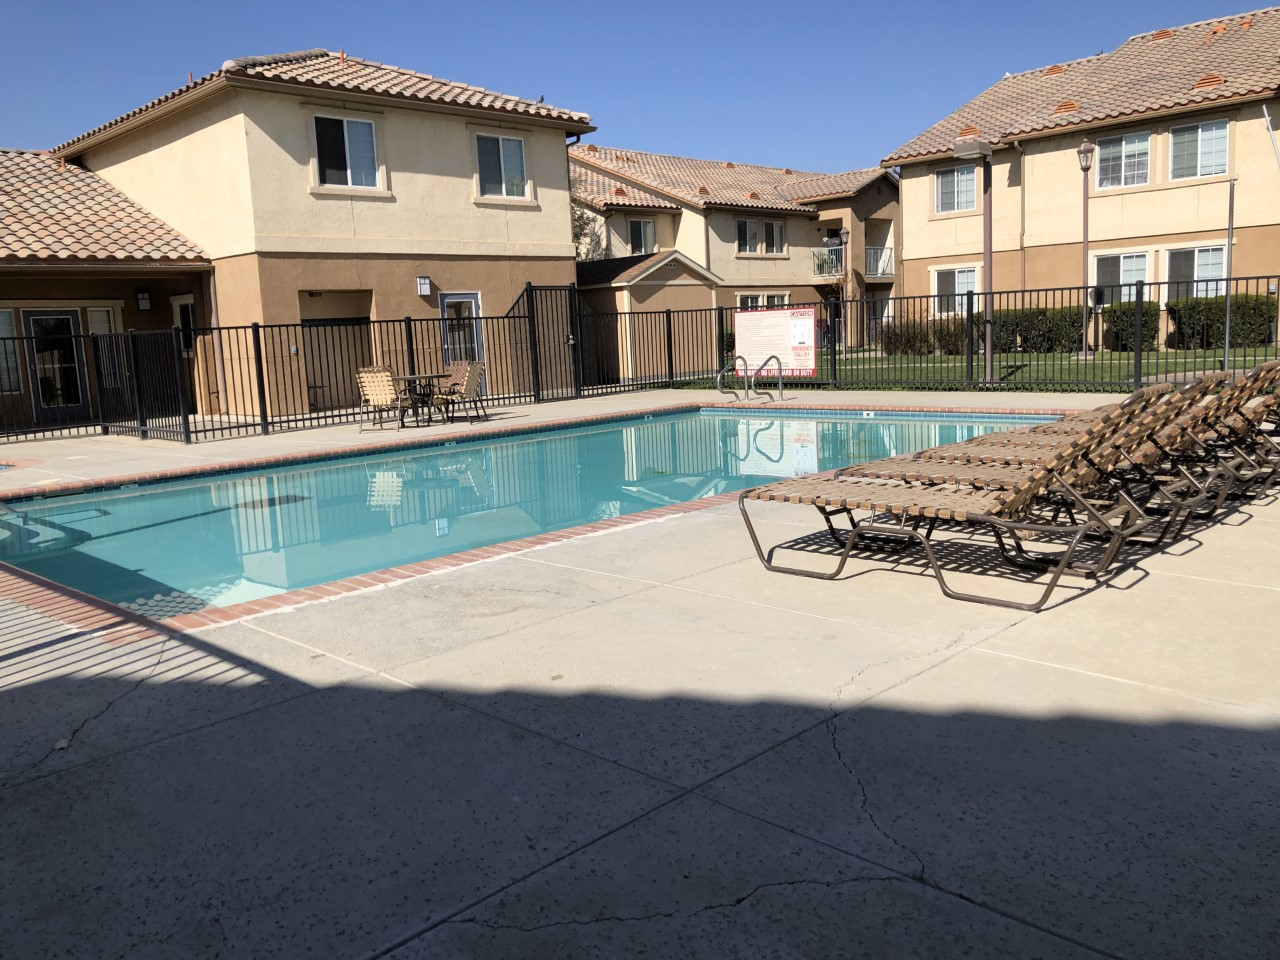 Photo of HEARTHSTONE VILLAGE. Affordable housing located at 1217 S SEVENTH AVE AVENAL, CA 93204